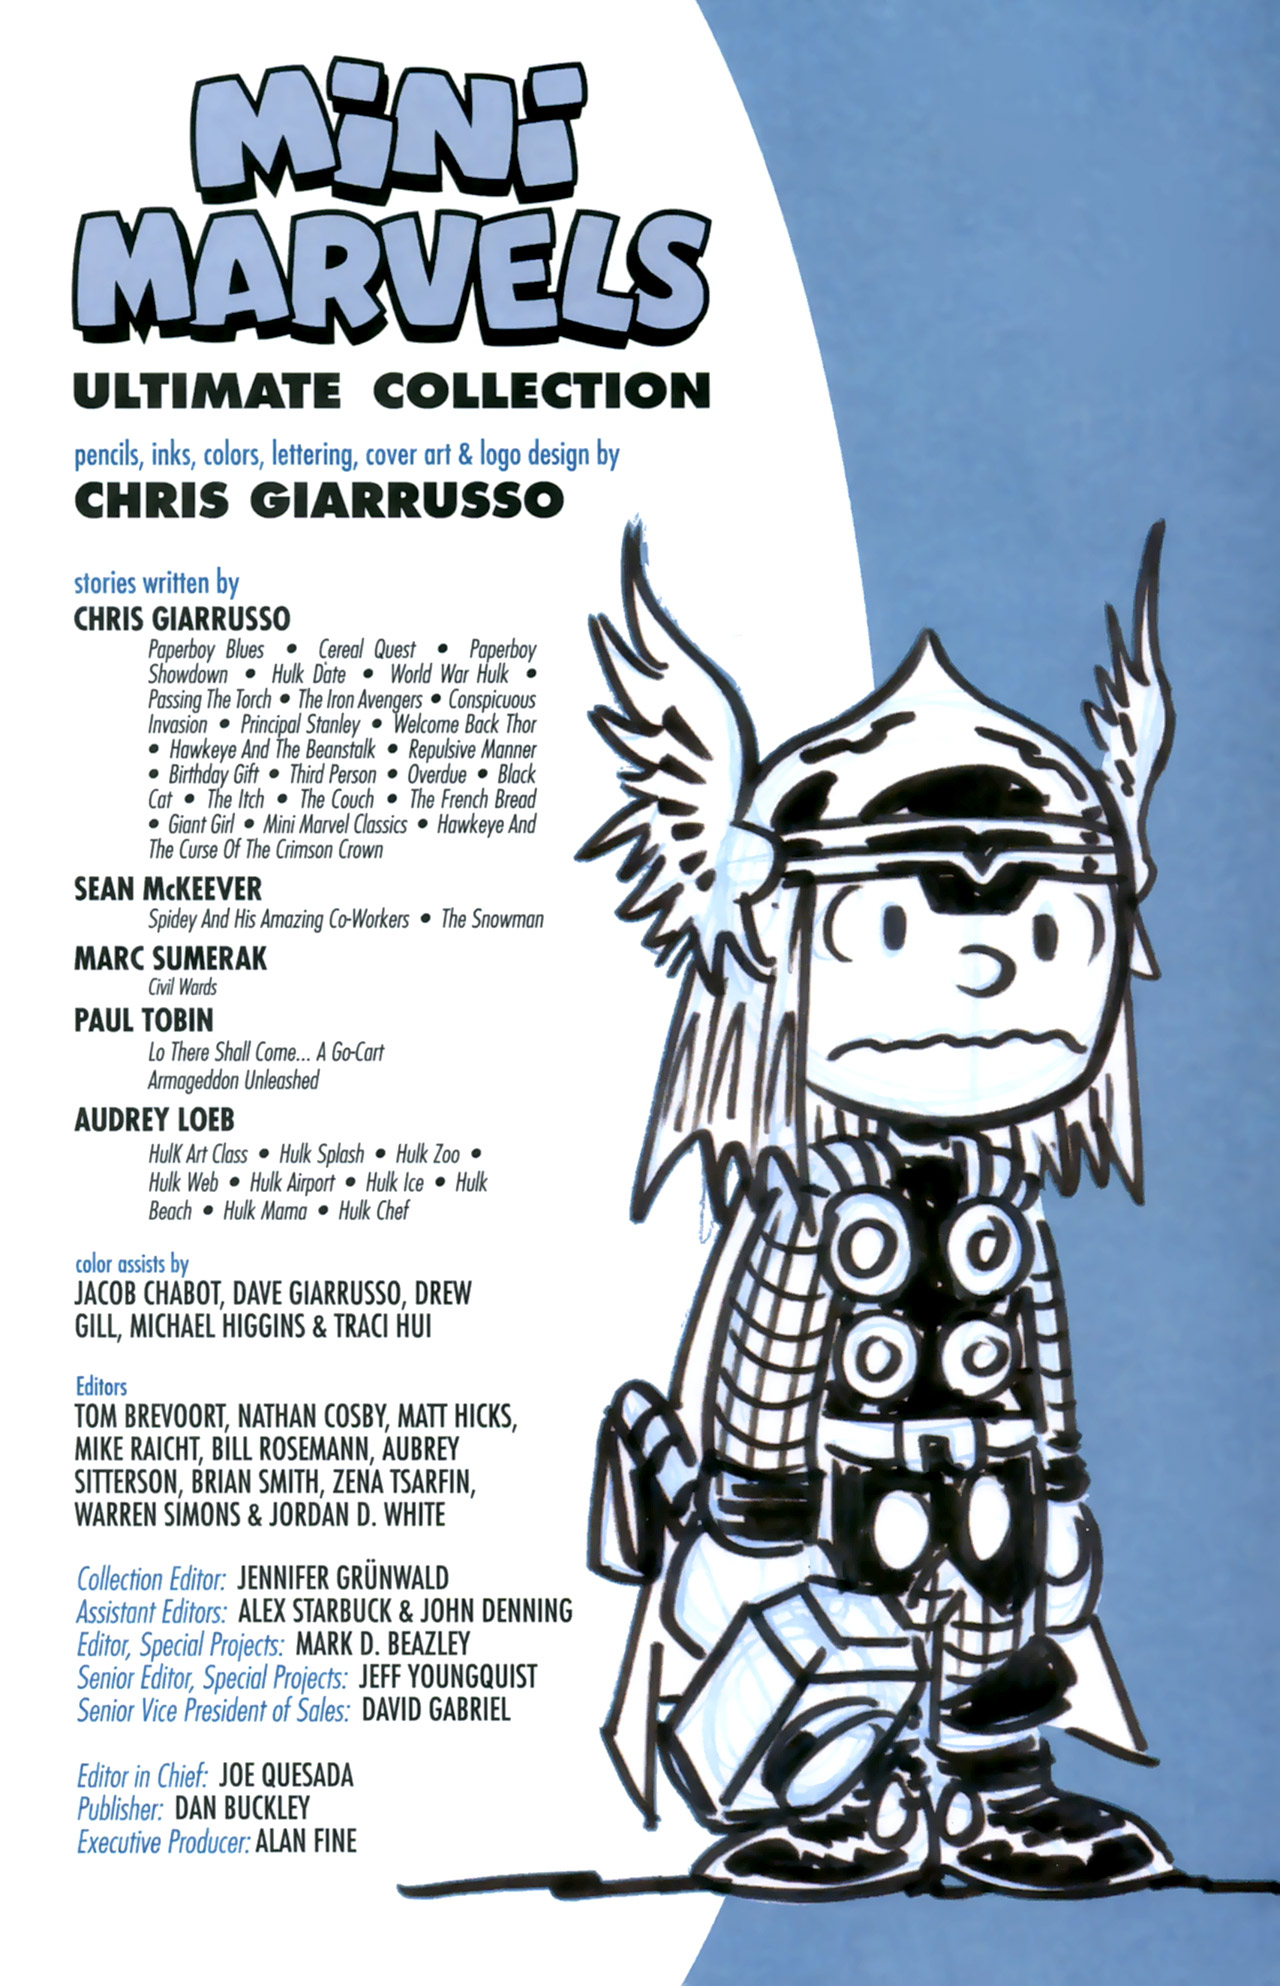 Read online Mini Marvels Ultimate Collection comic -  Issue # TPB (Part 1) - 4